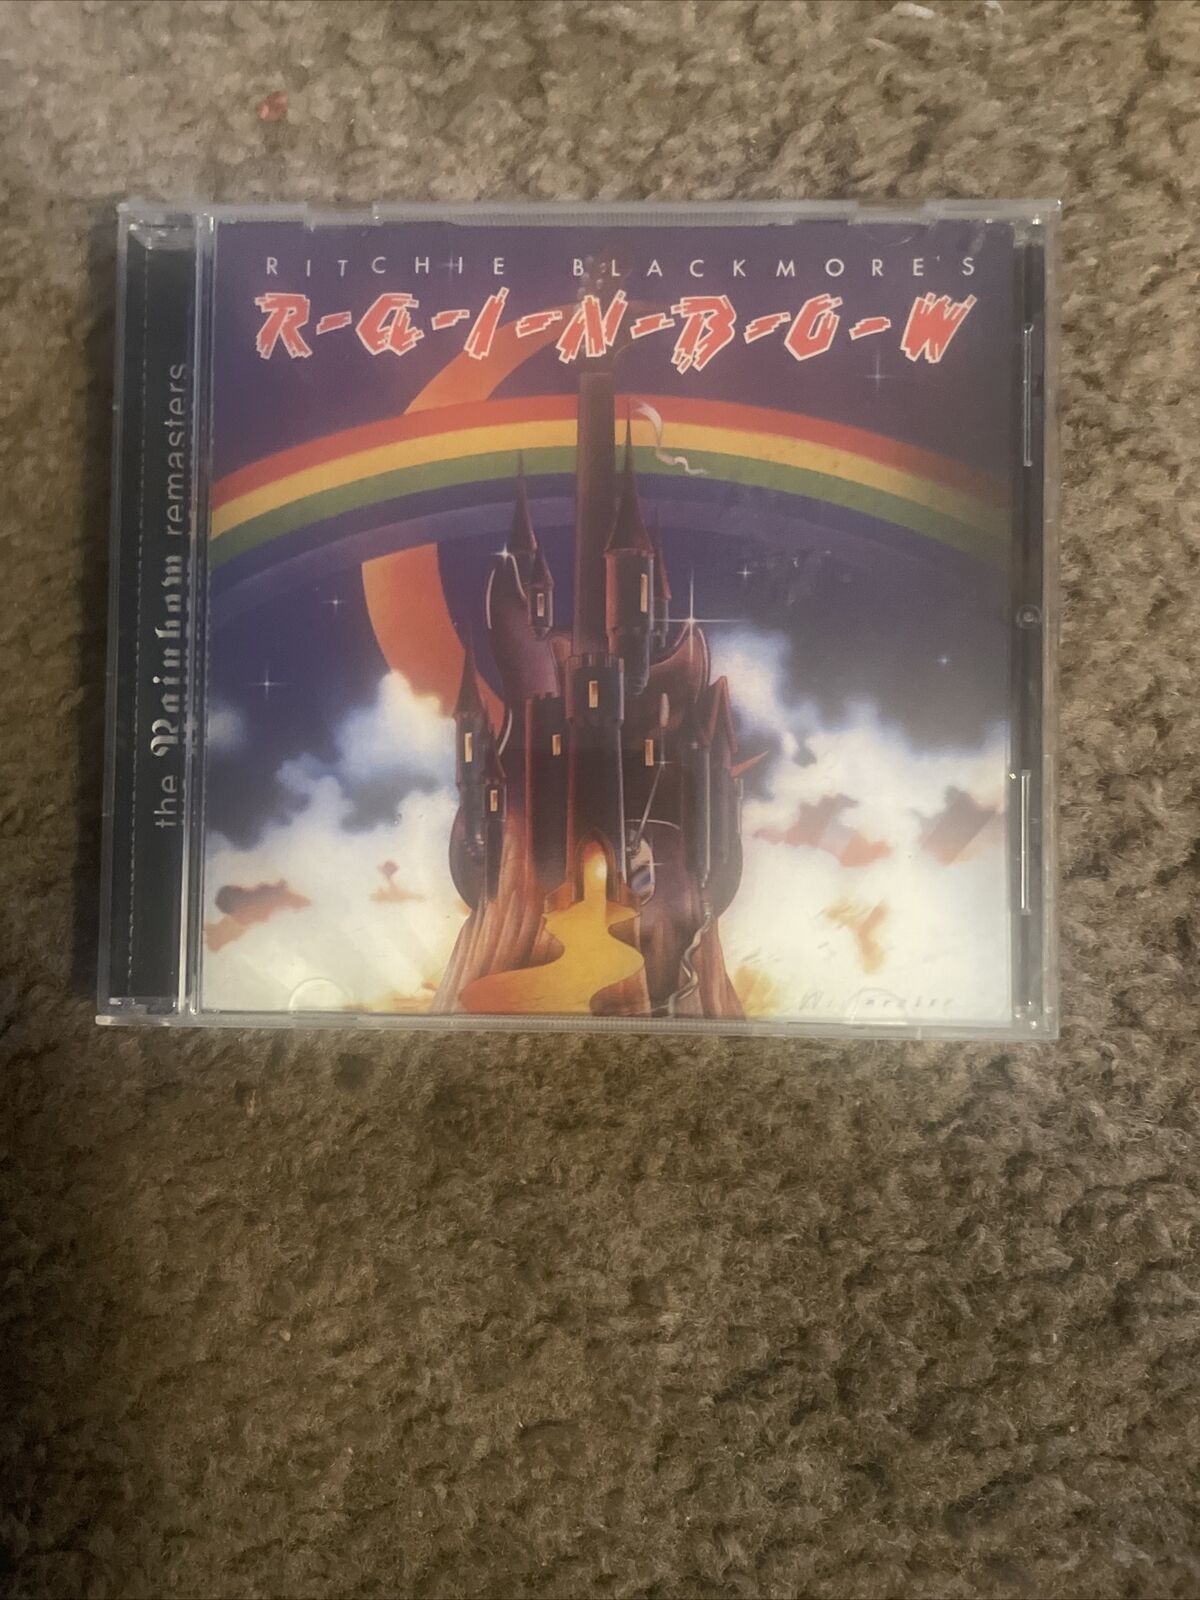 Ritchie Blackmore's Rainbow (Remastered) by Rainbow (CD, 1975/1999) Polydor VG!